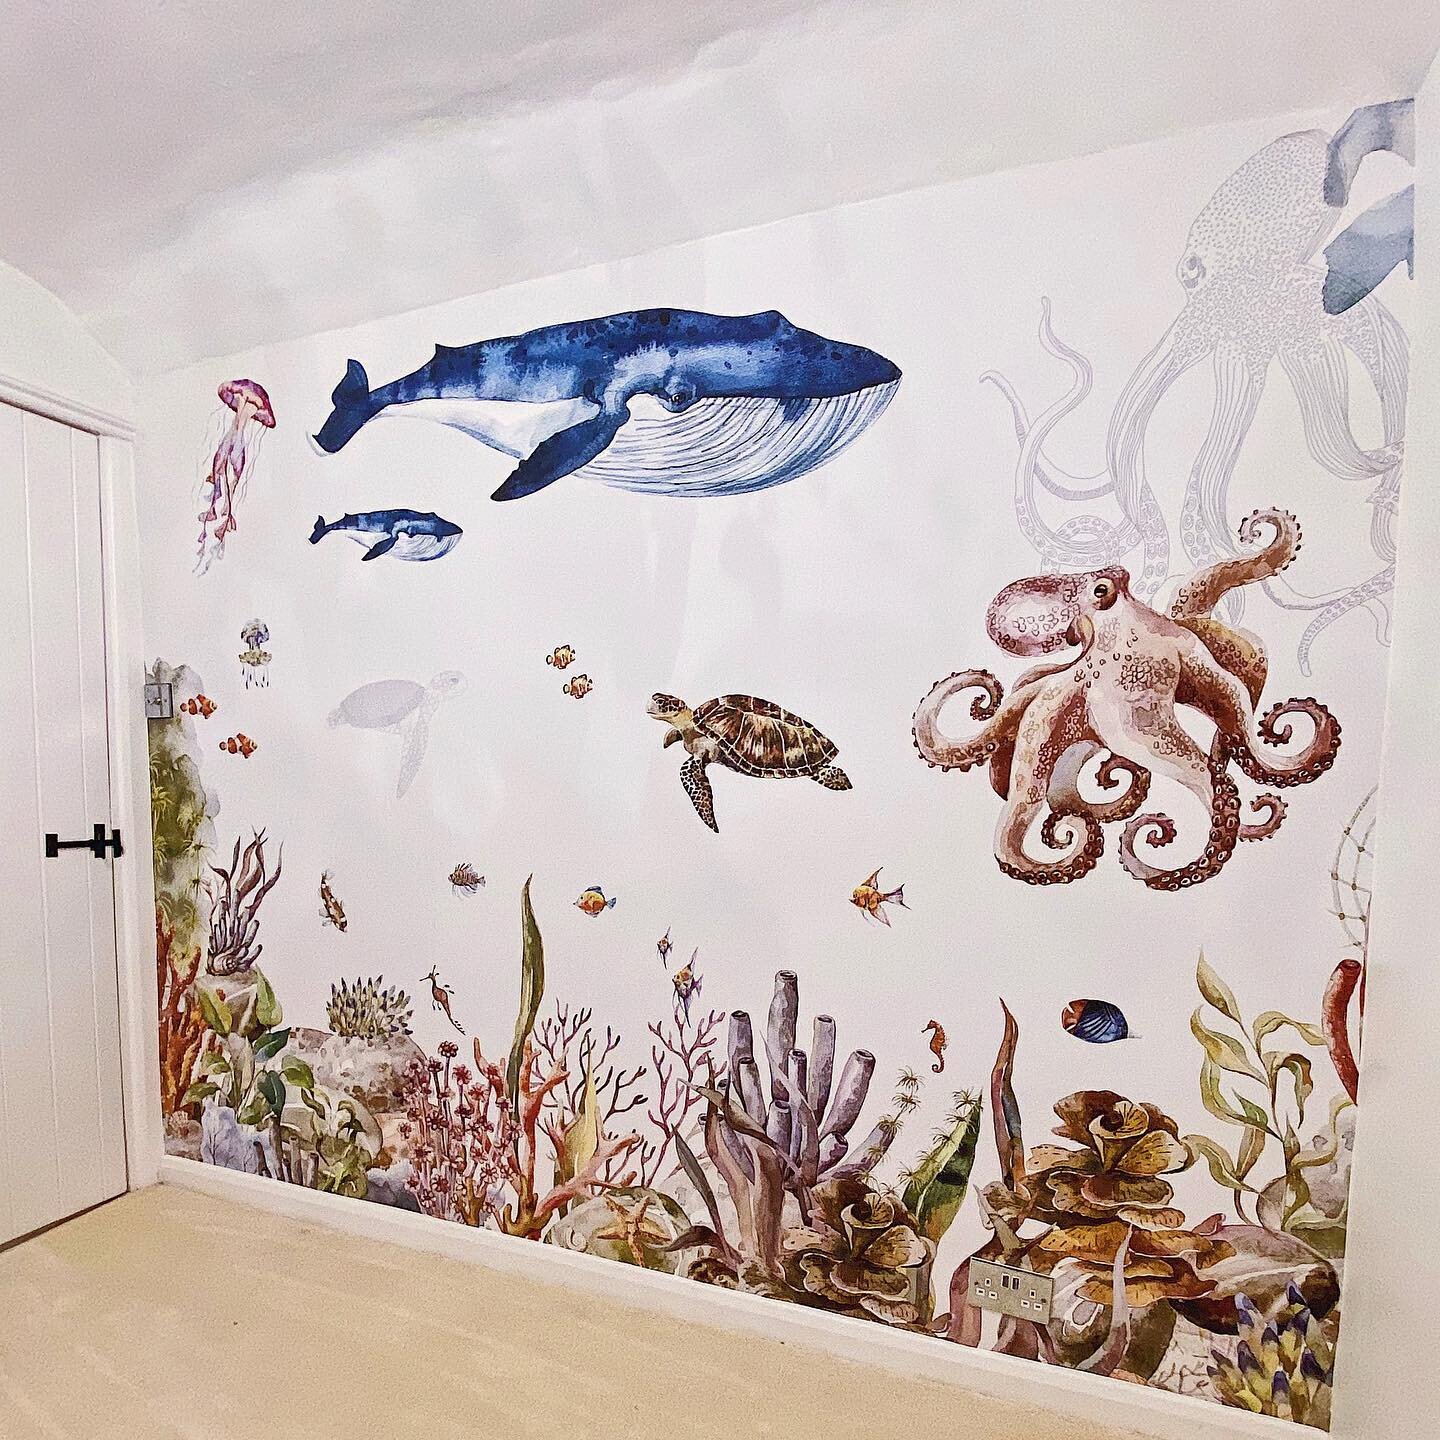 An evening spent working on a little project at home, wallpapering this amazing mural for our new arrival due any day.